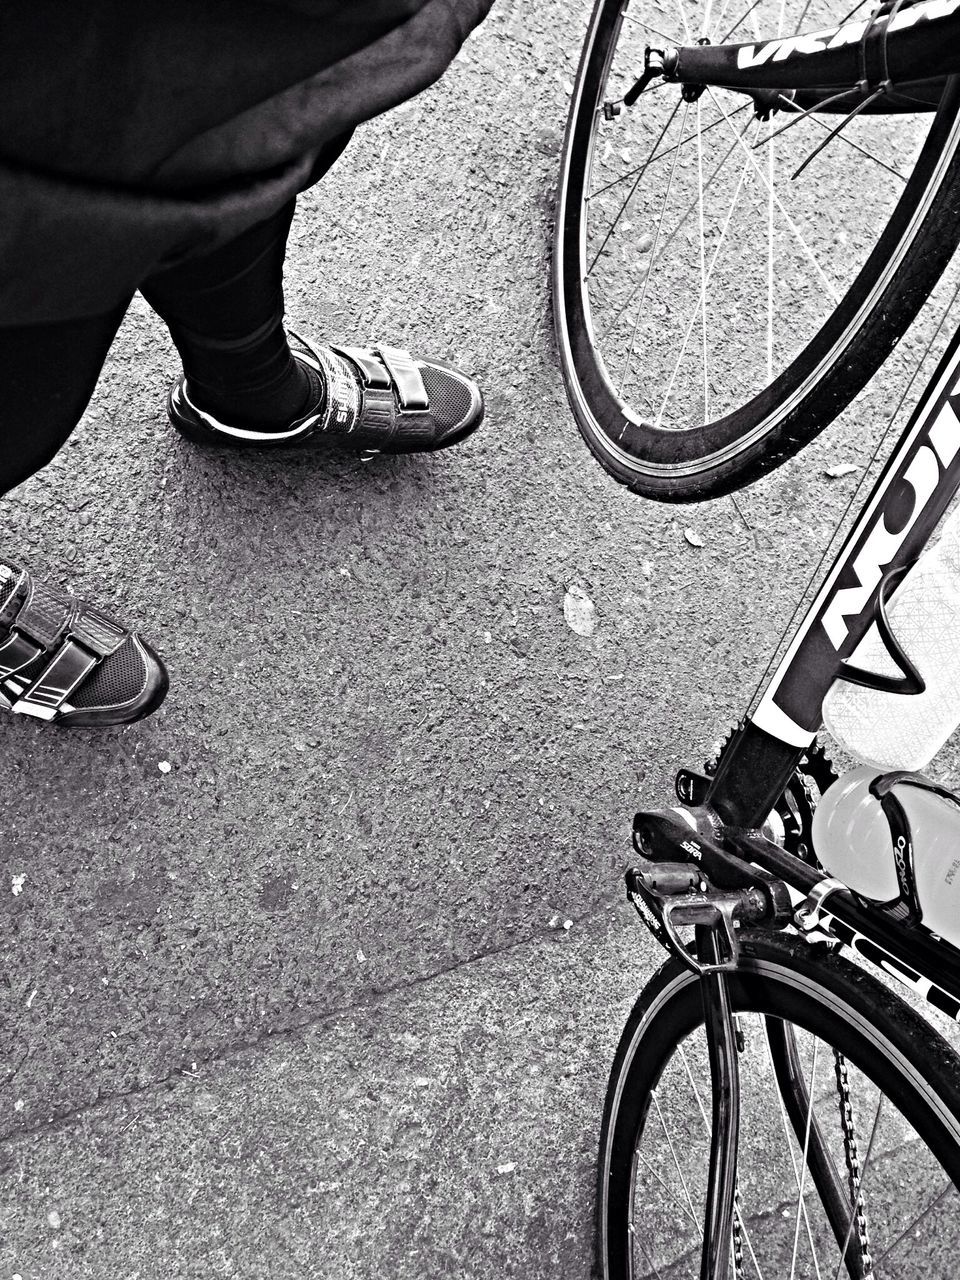 low section, bicycle, transportation, person, land vehicle, mode of transport, shoe, street, part of, men, high angle view, cycling, riding, leisure activity, lifestyles, human foot, cropped